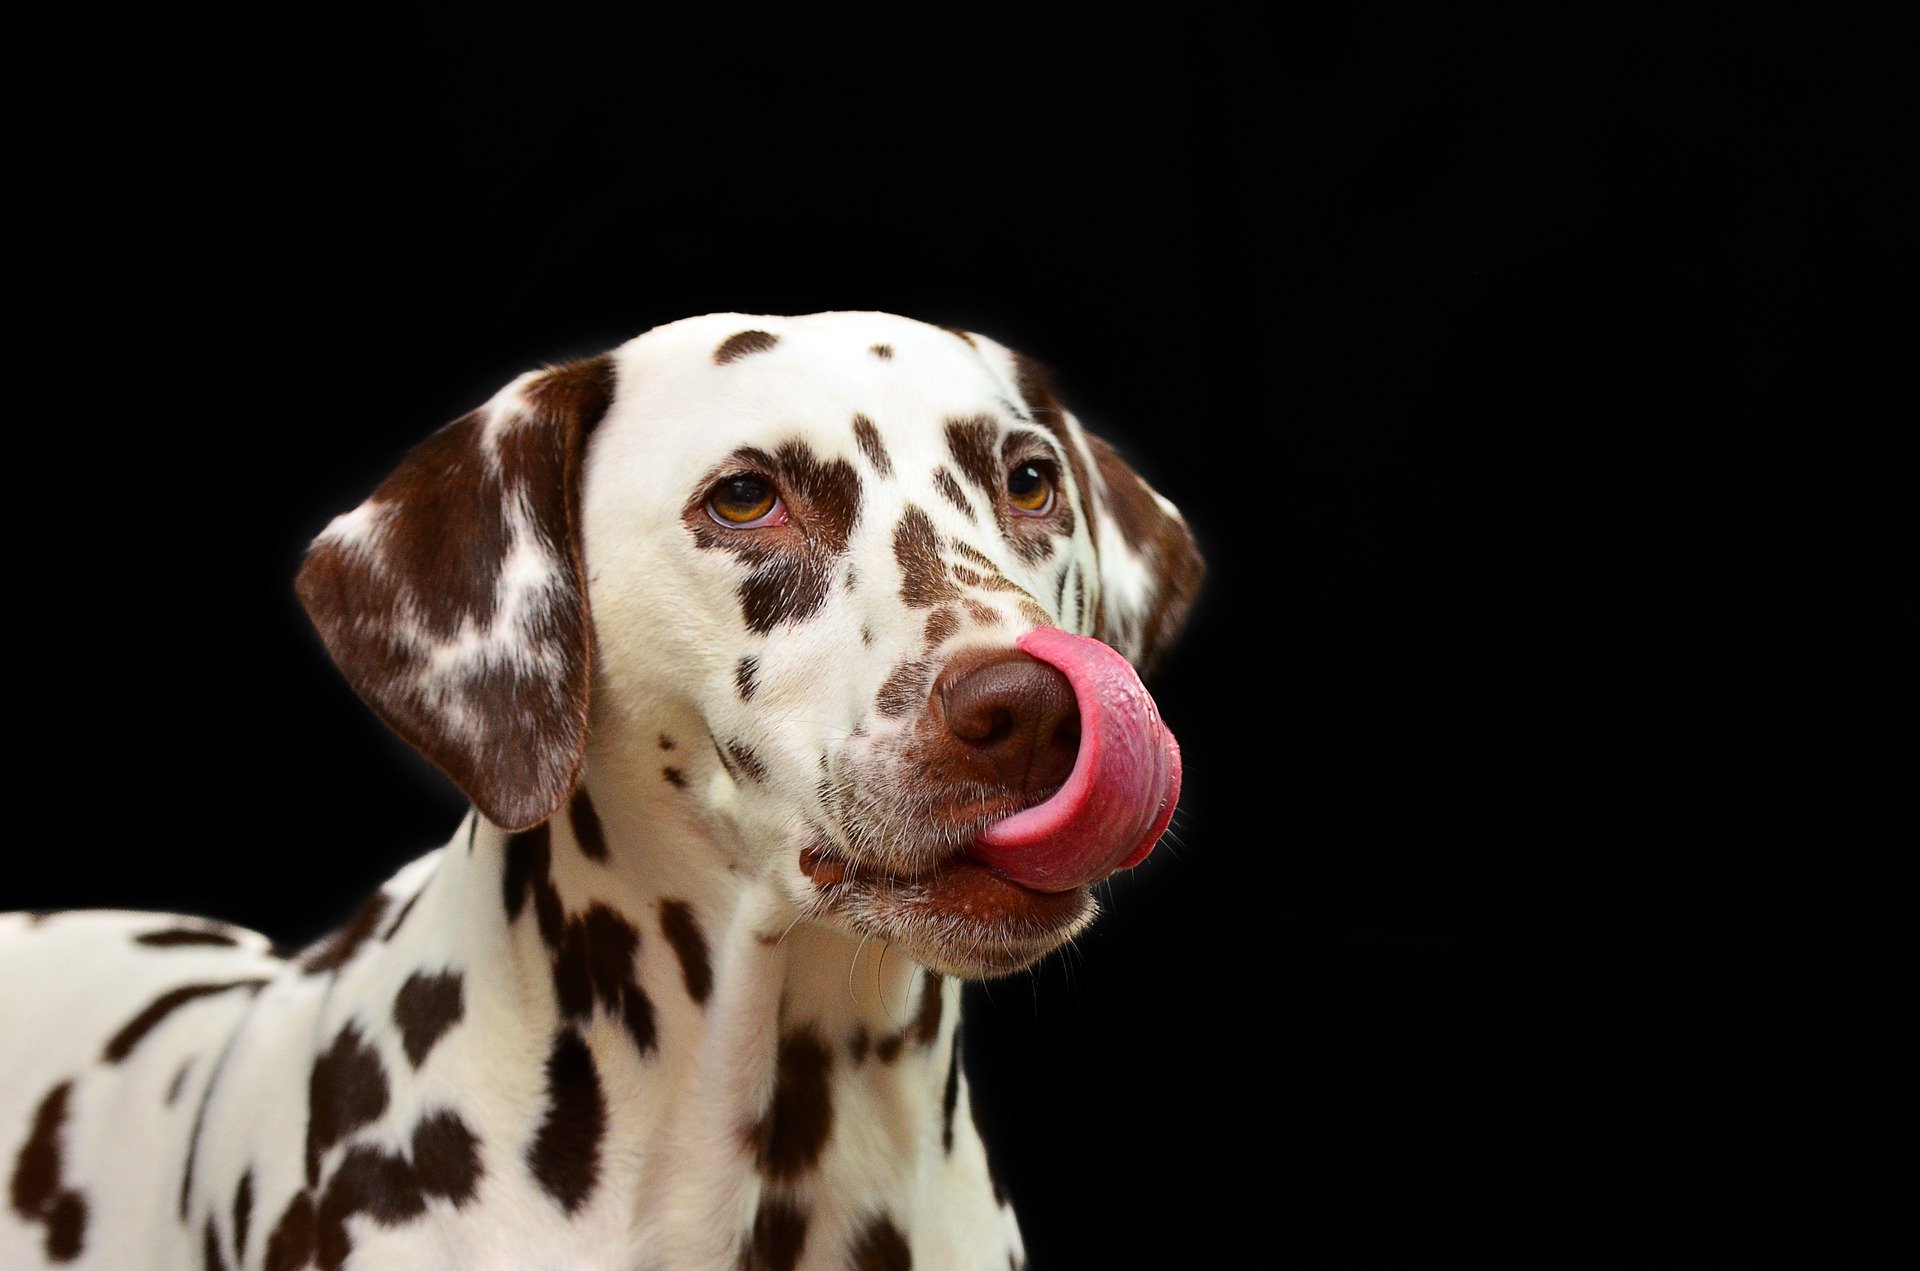 feeding a dog with no teeth - spotted dog with tongue out